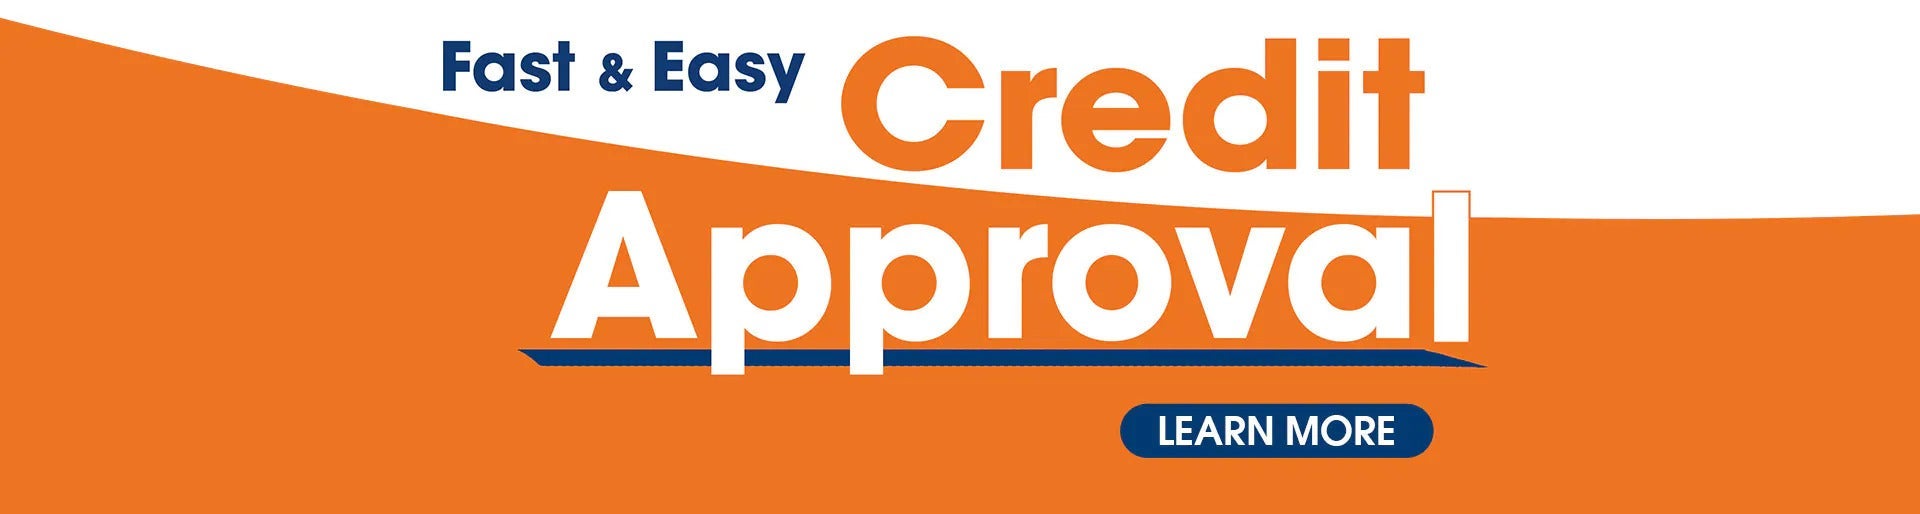 Learn more about fast and easy credit approval